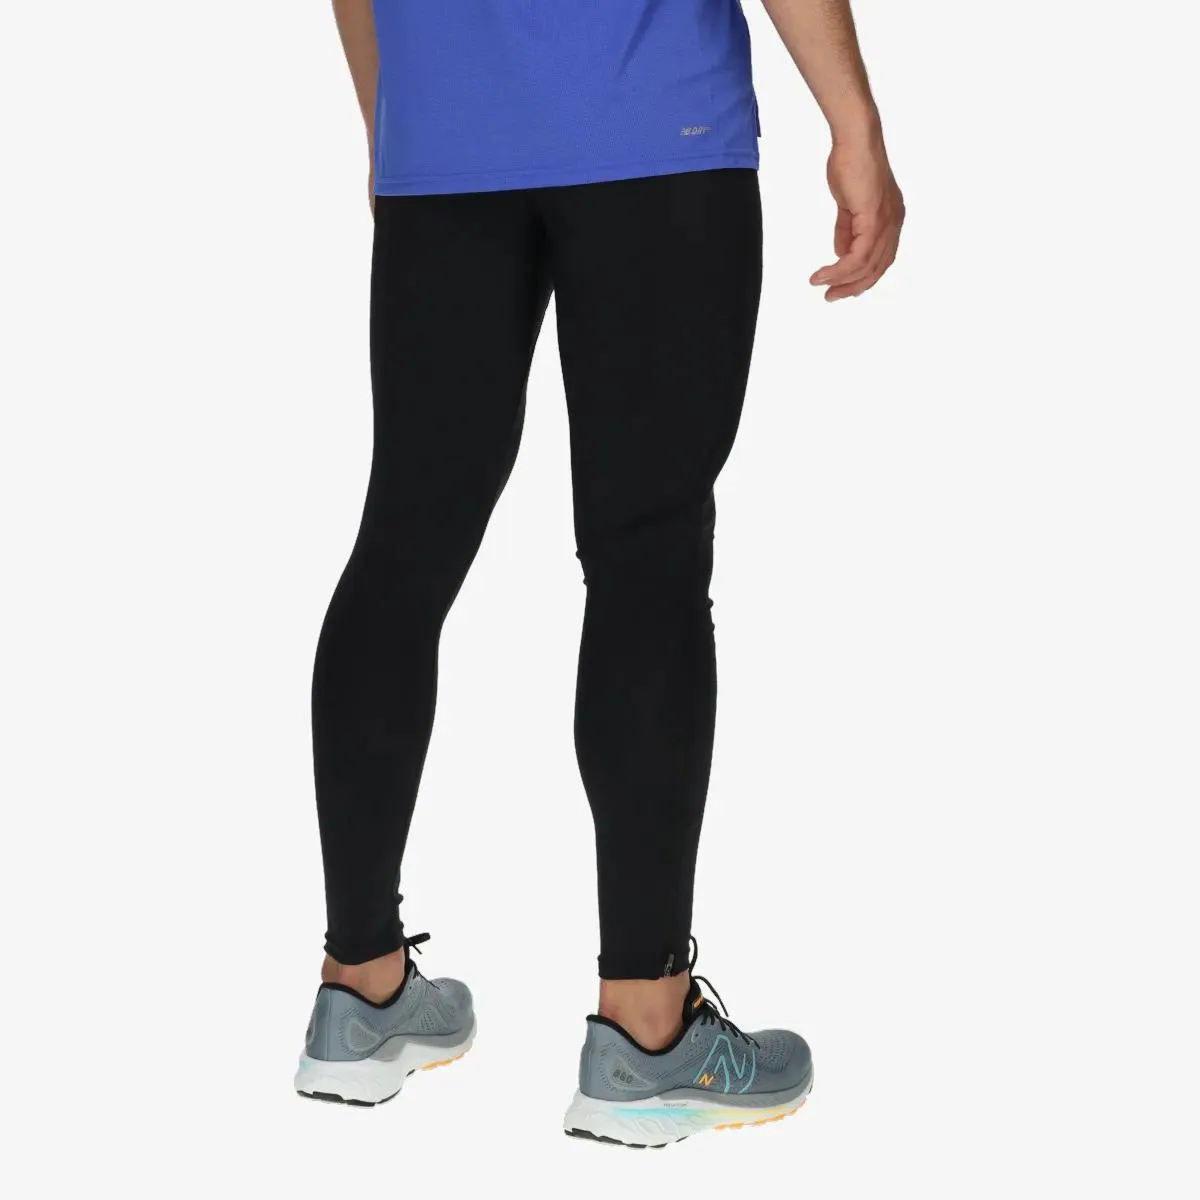 NEW BALANCE ACCELERATE TIGHT 